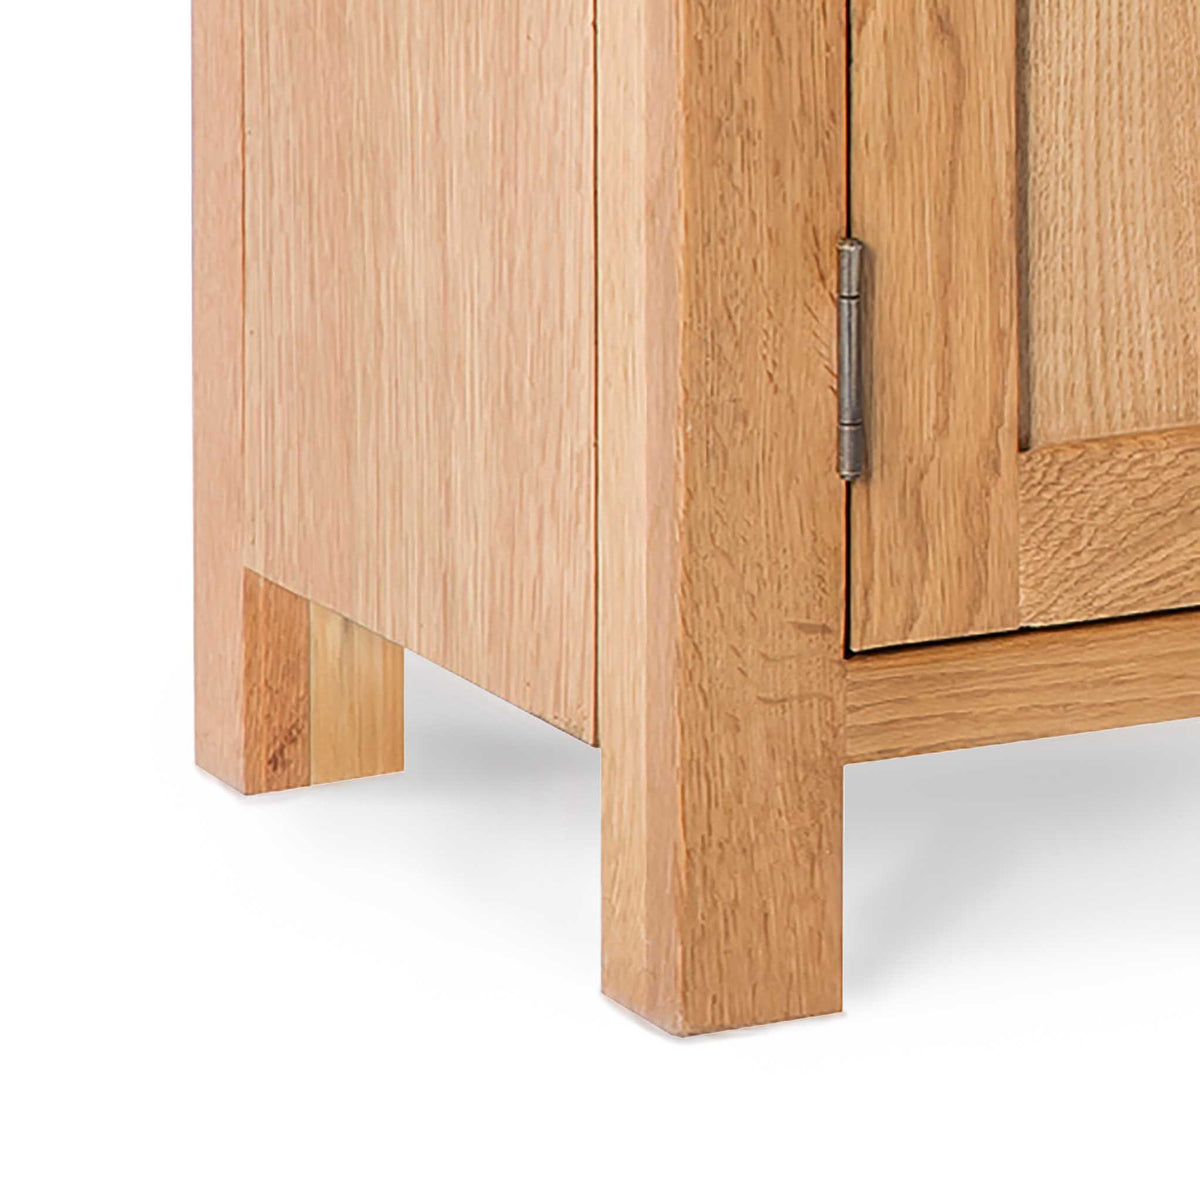 Surrey Oak TV Stand 120cm - Close up of feet of TV Stand